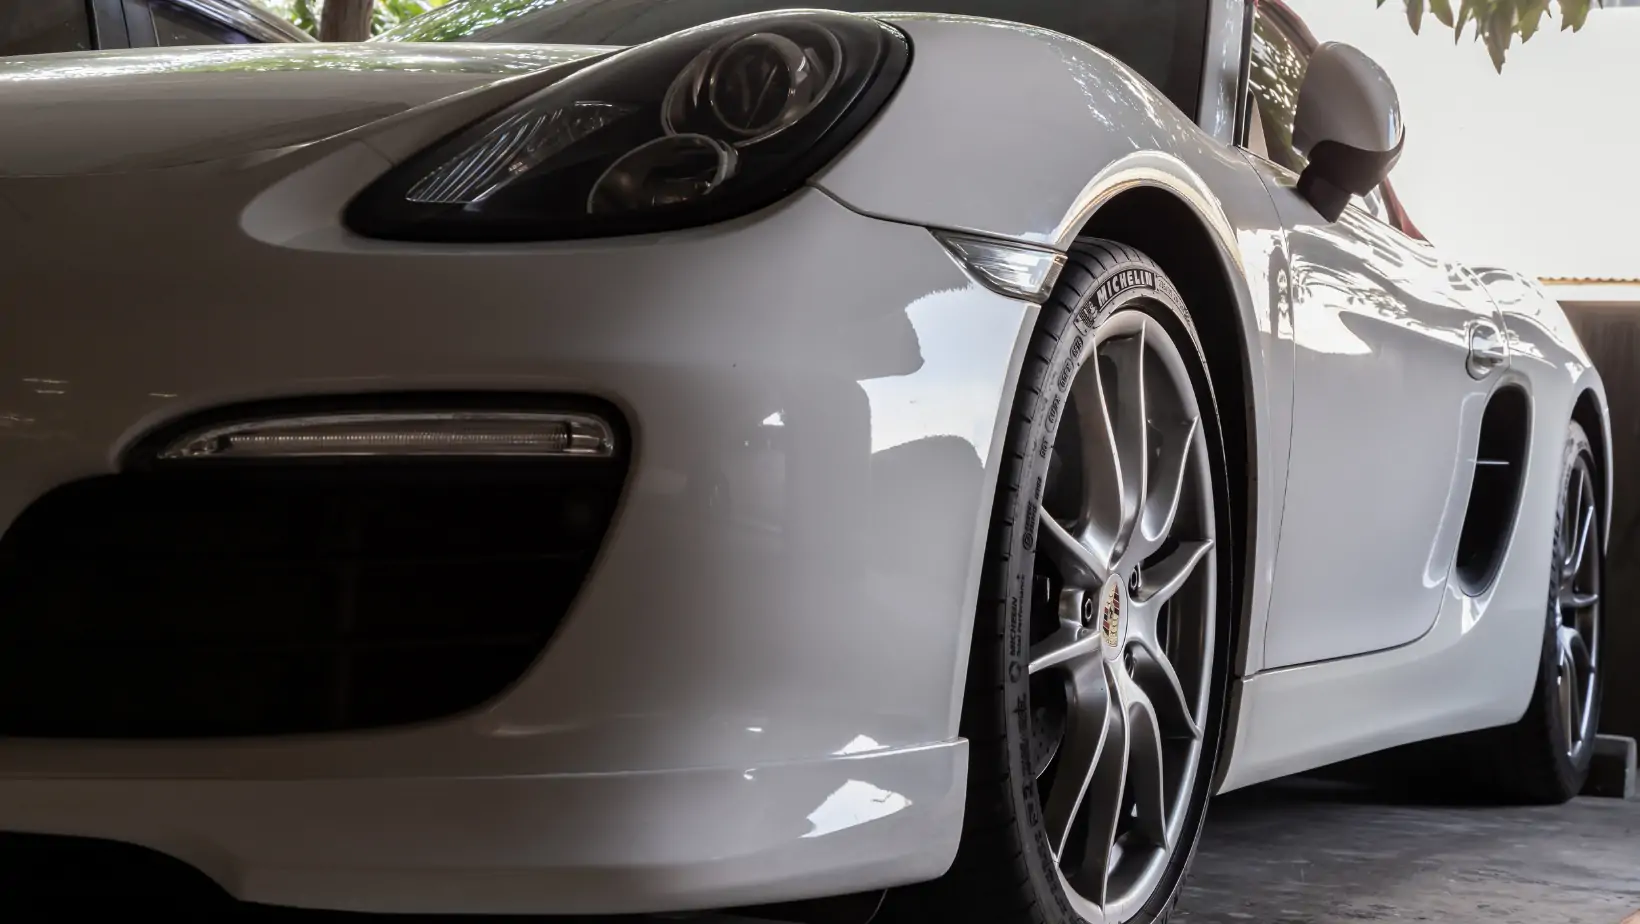 Revving Up the Future: Porsche Partners with Google for Next-Gen In-Car Tech